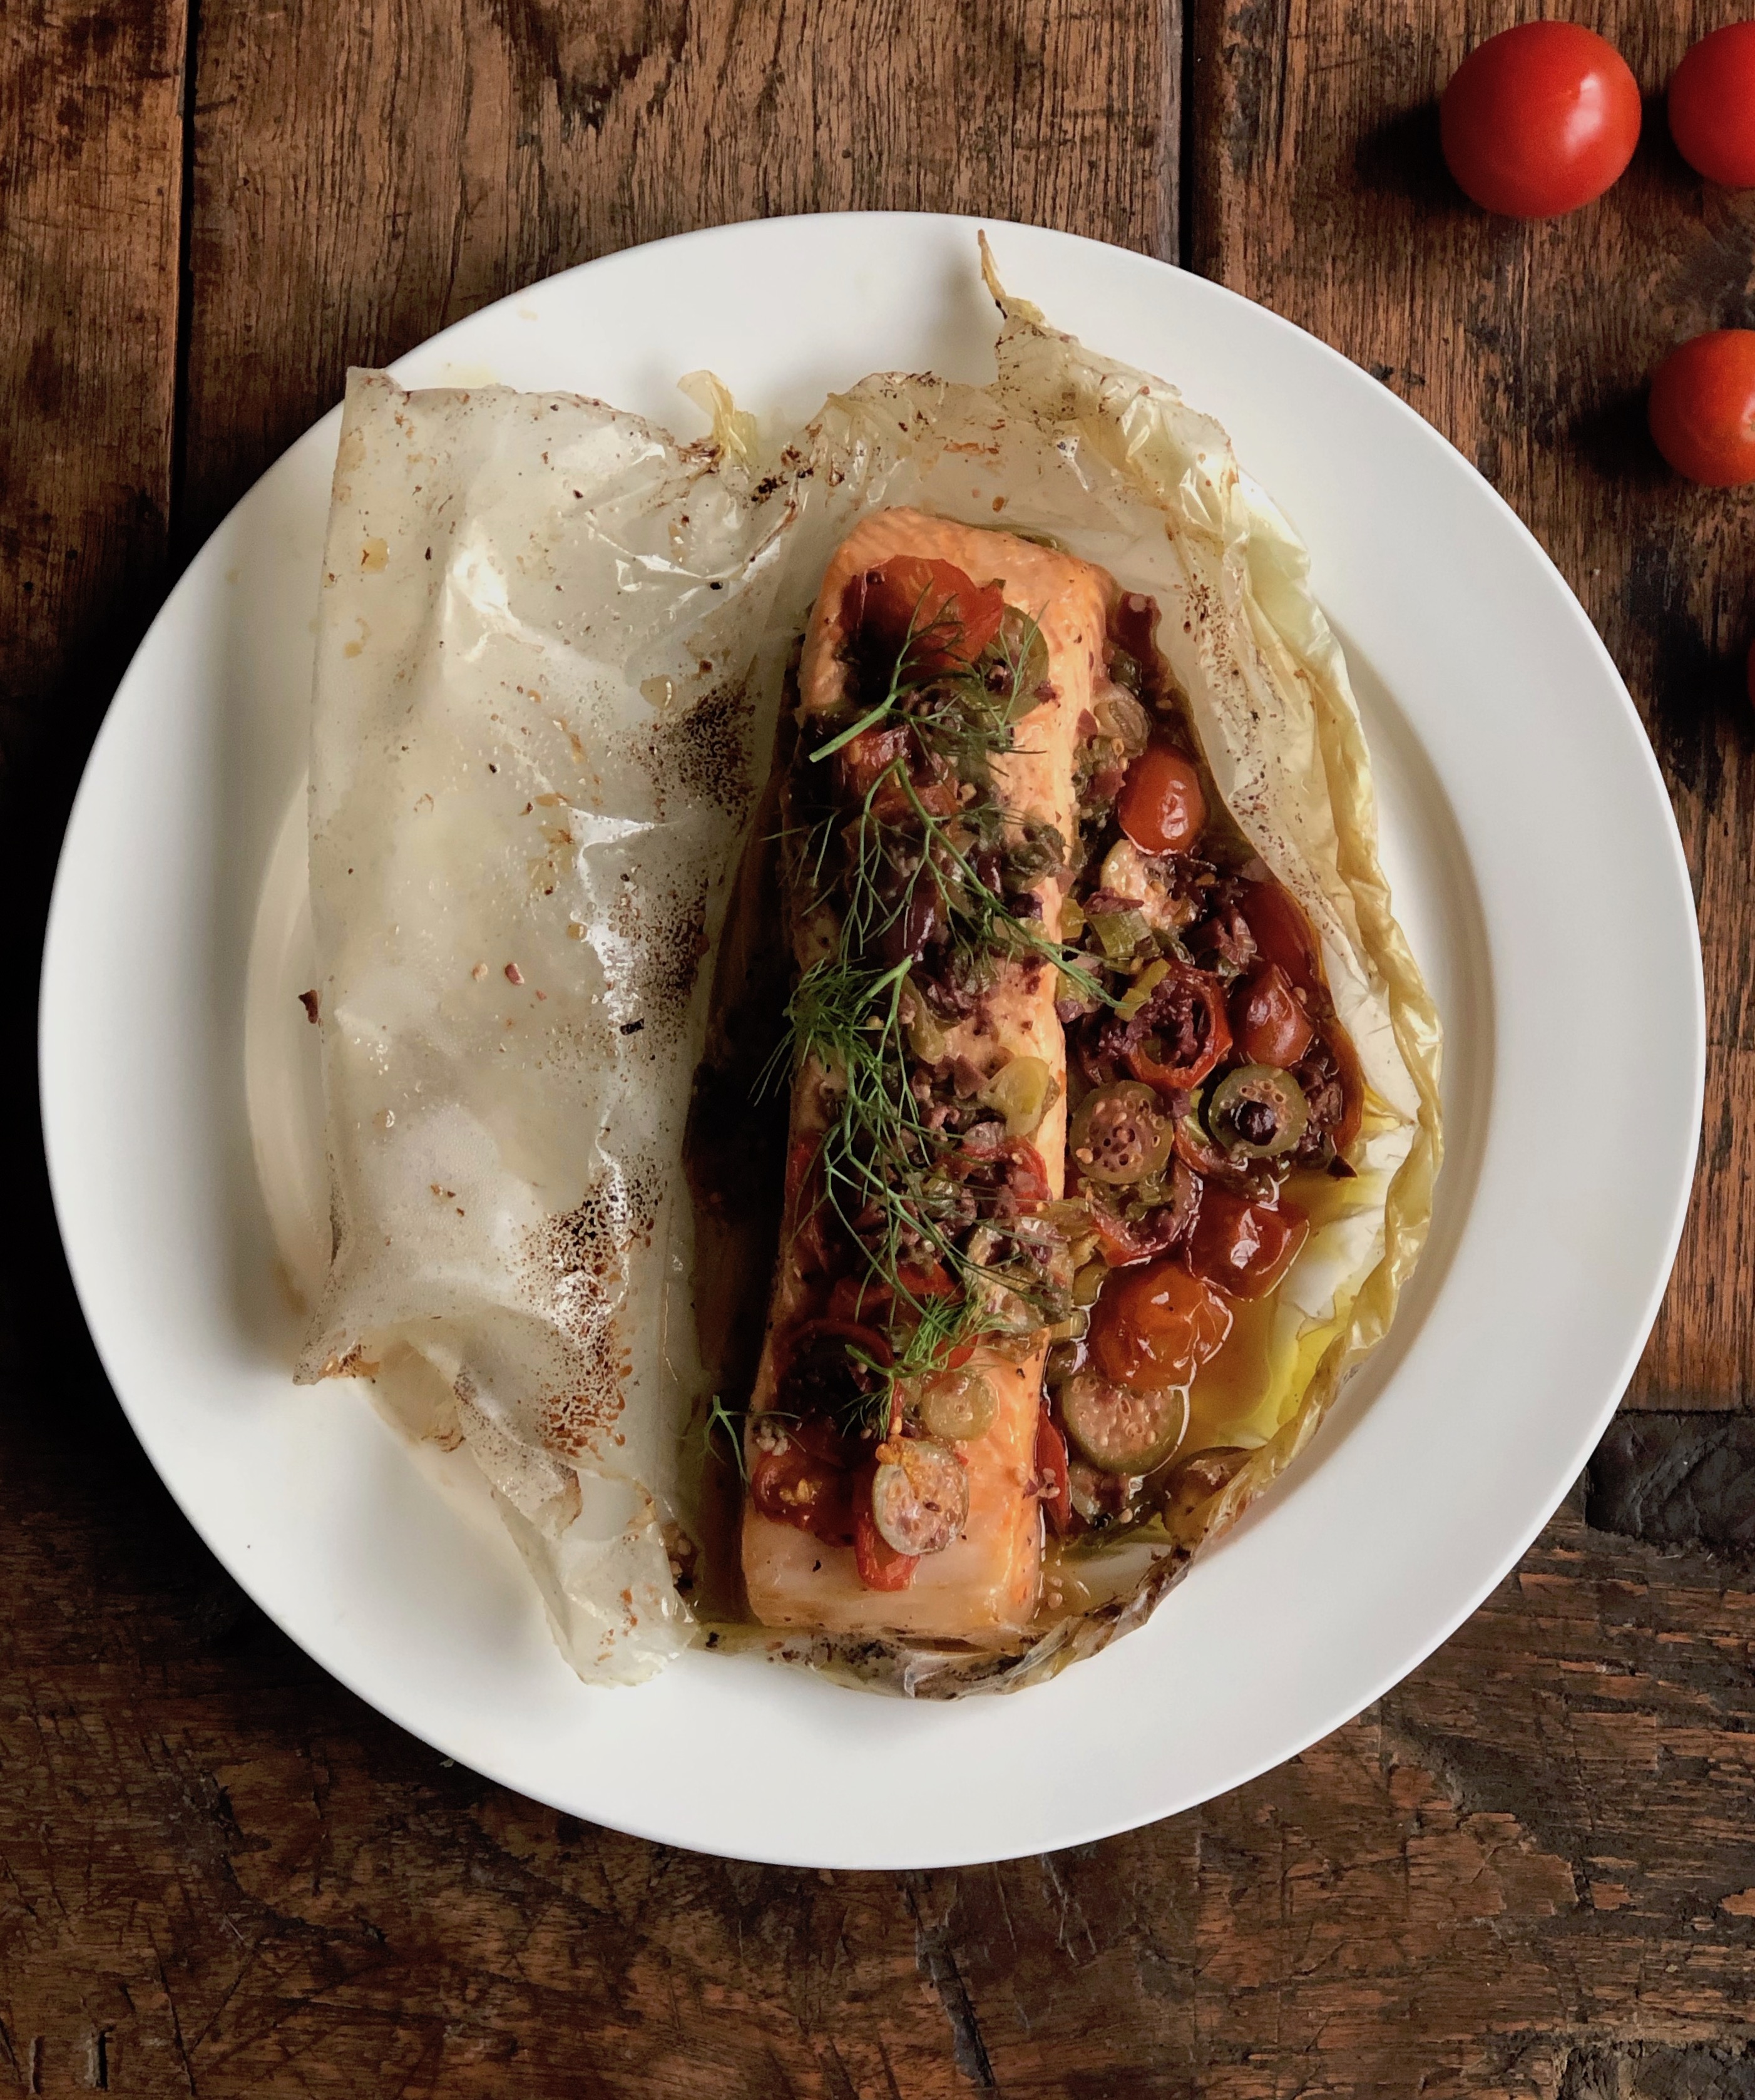 mediterranean salmon baked in parchment (en papillote) recipe